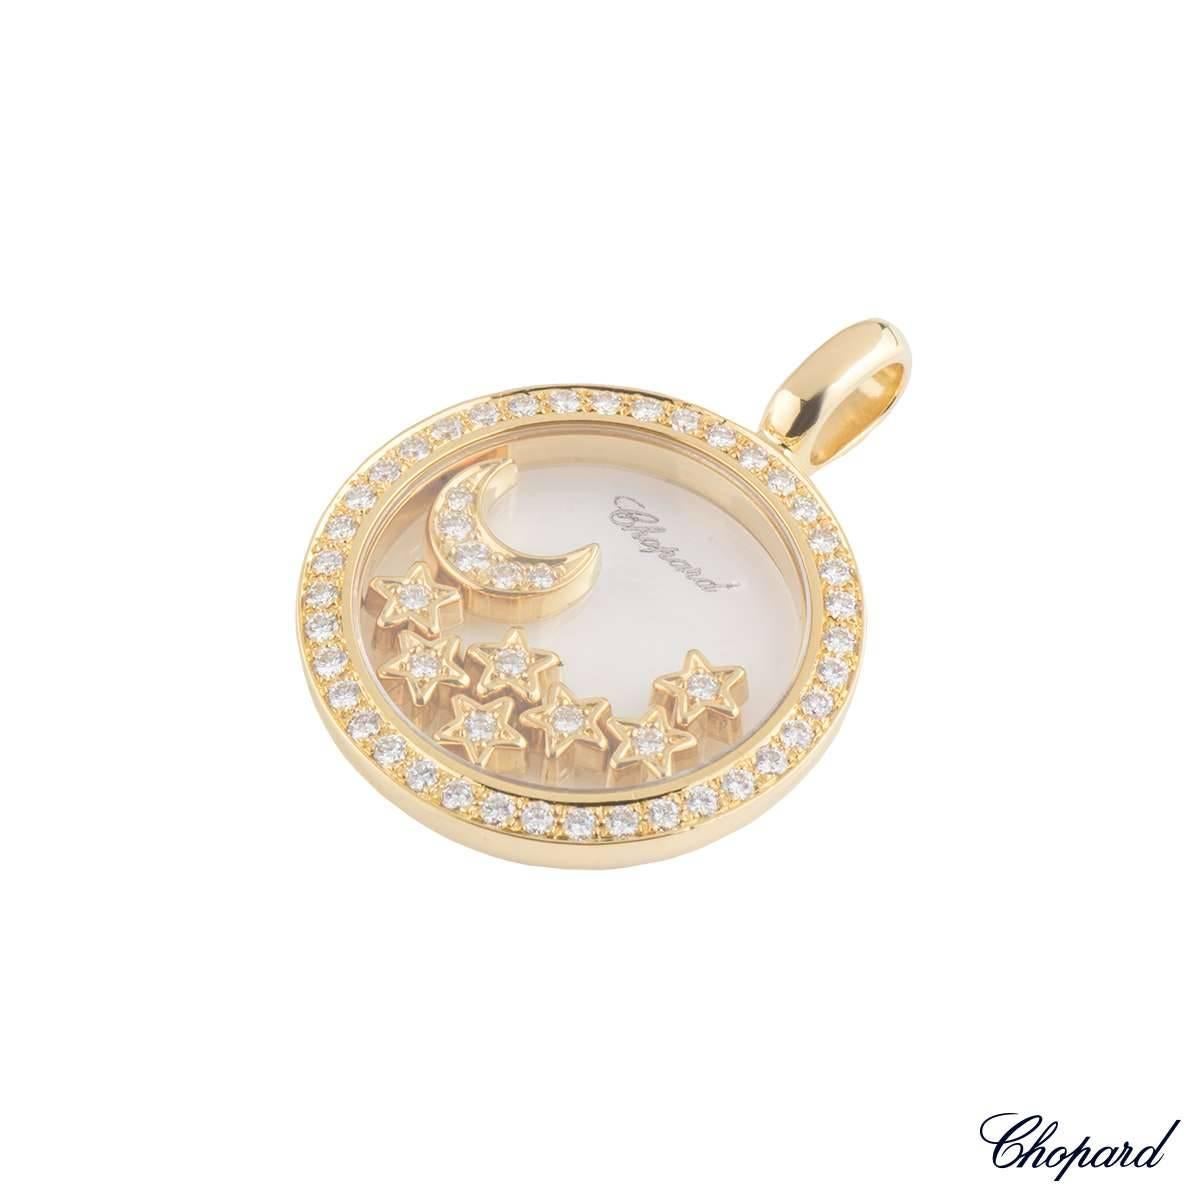 A classic 18k yellow gold Chopard diamond pendant from the Happy Diamonds collection. The pendant comprises of a circular motif with a glass centre containing 7 stars and a moon with diamonds in each one. There are a total of 31 round brilliant cut